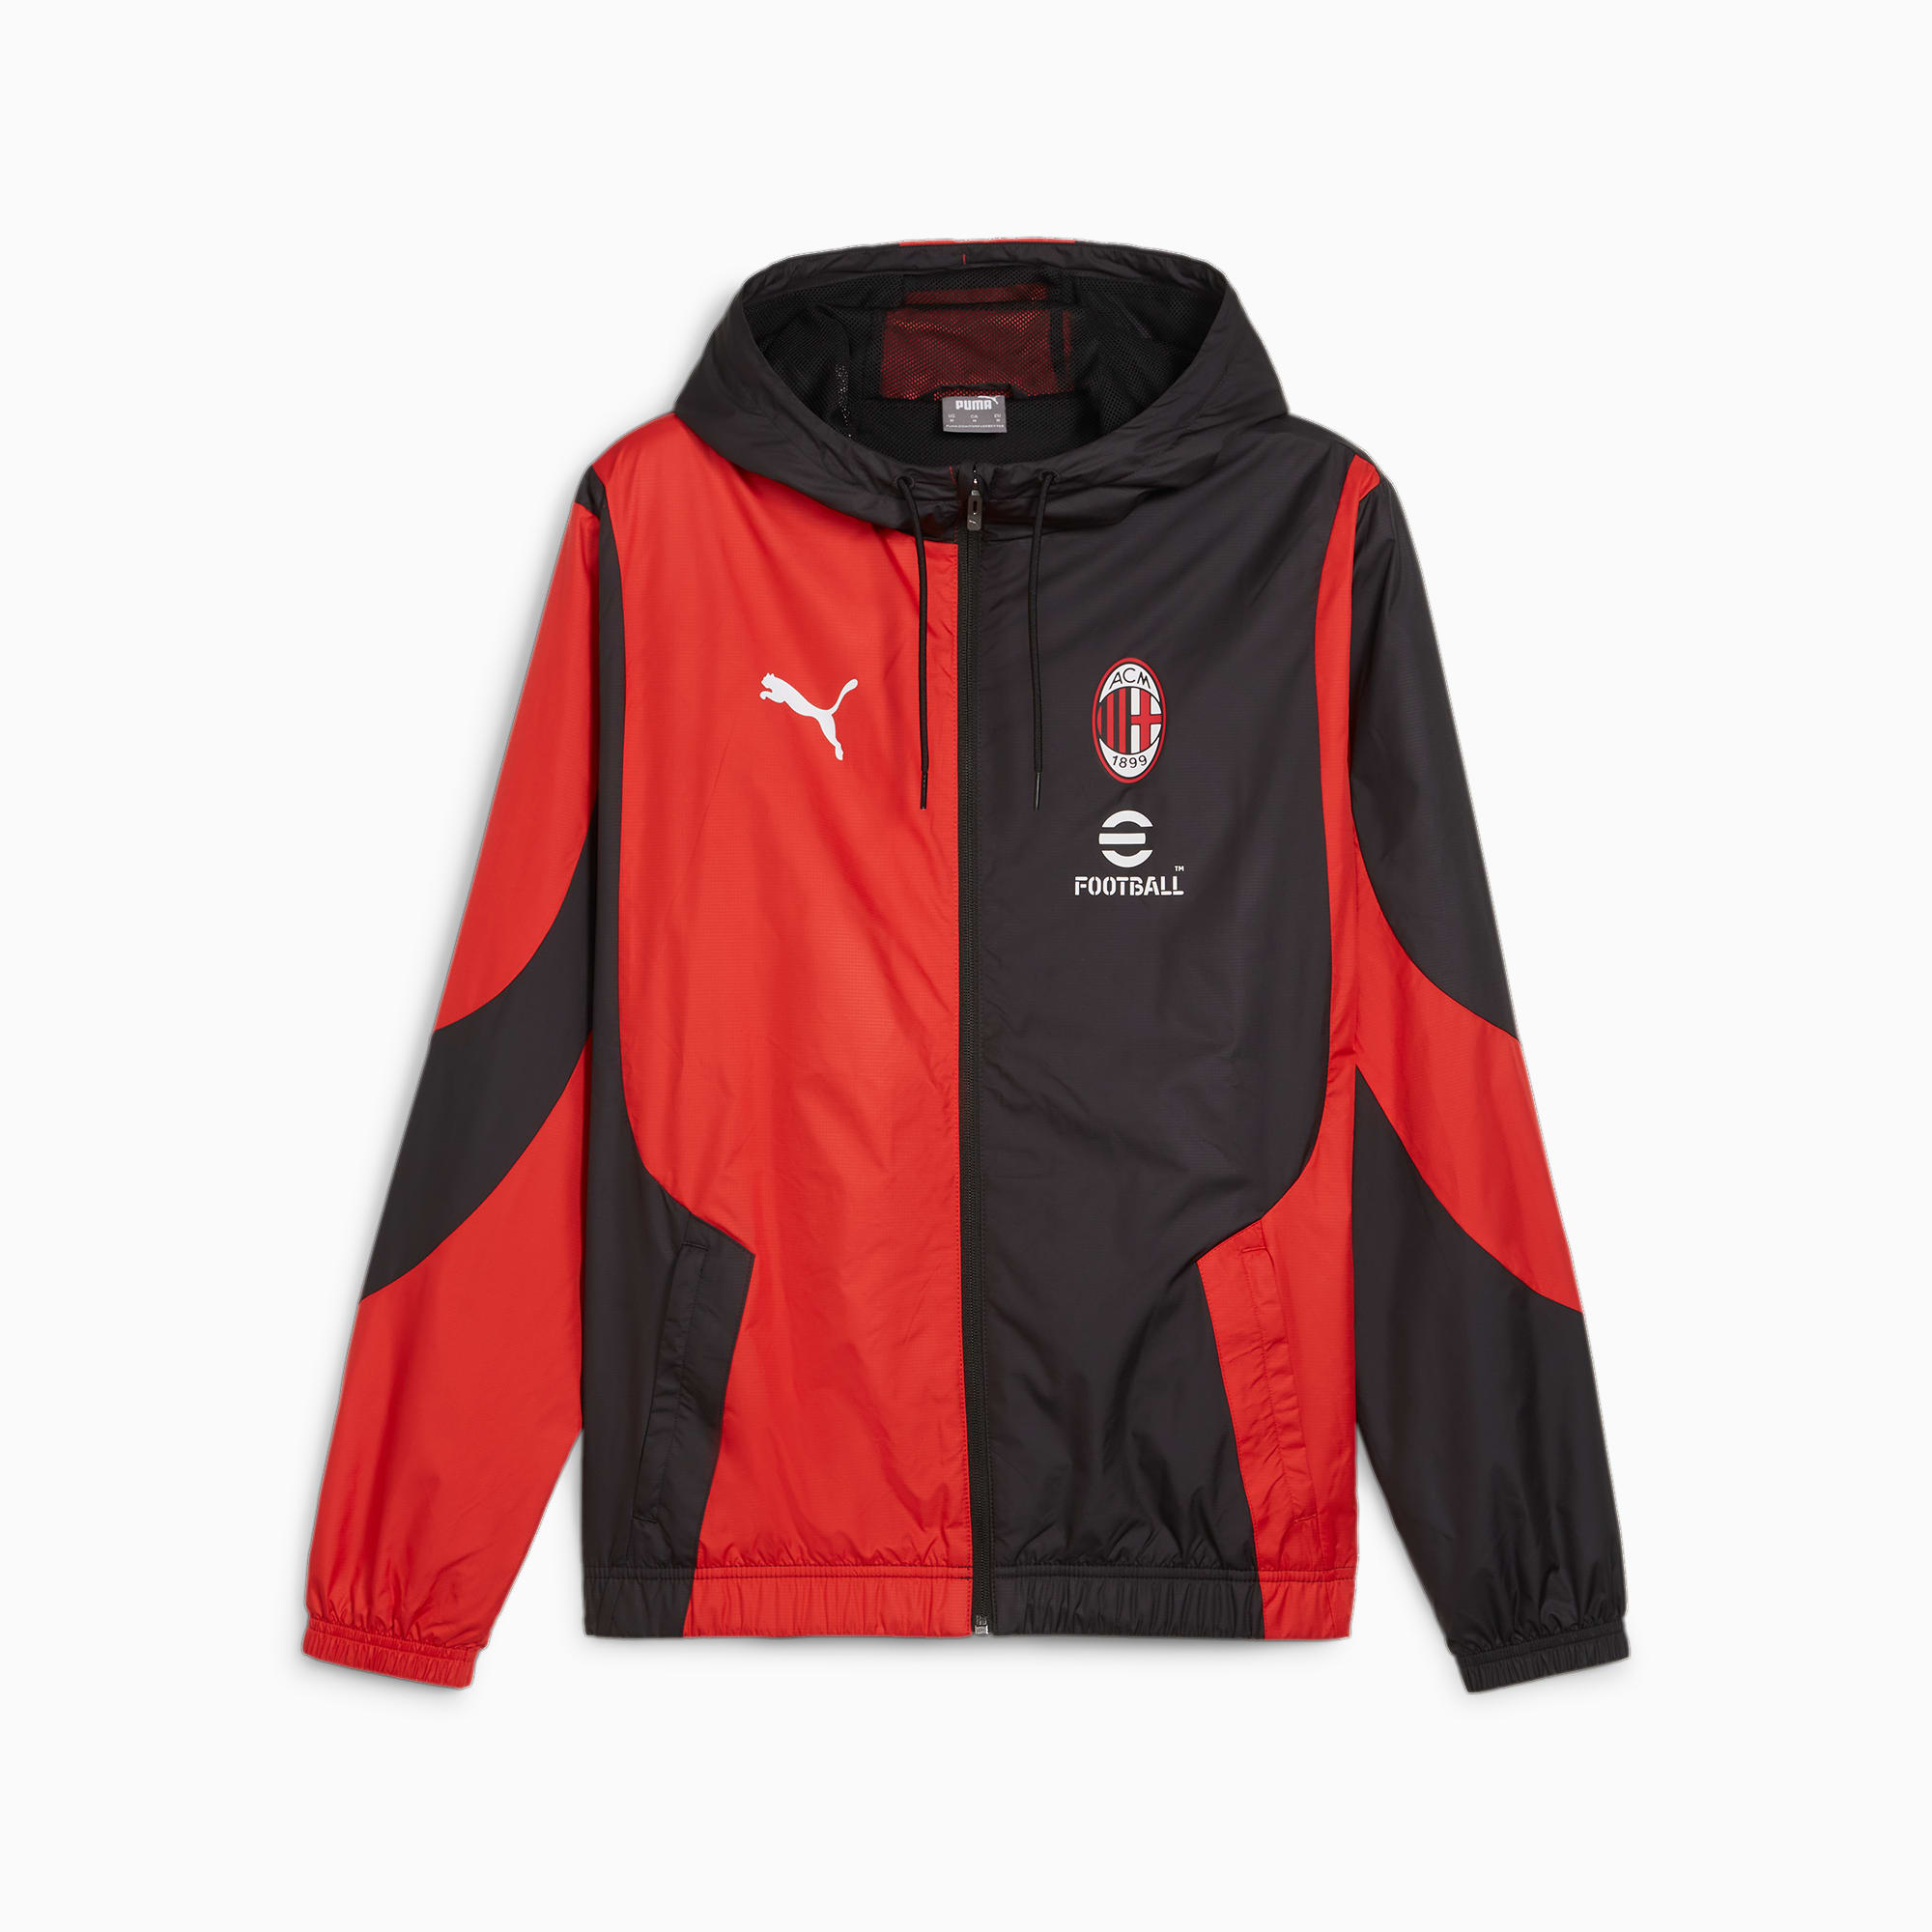 Men's PUMA AC Milan Pre-Match Jacket, Black/For All Time Red, Size 3XL, Clothing